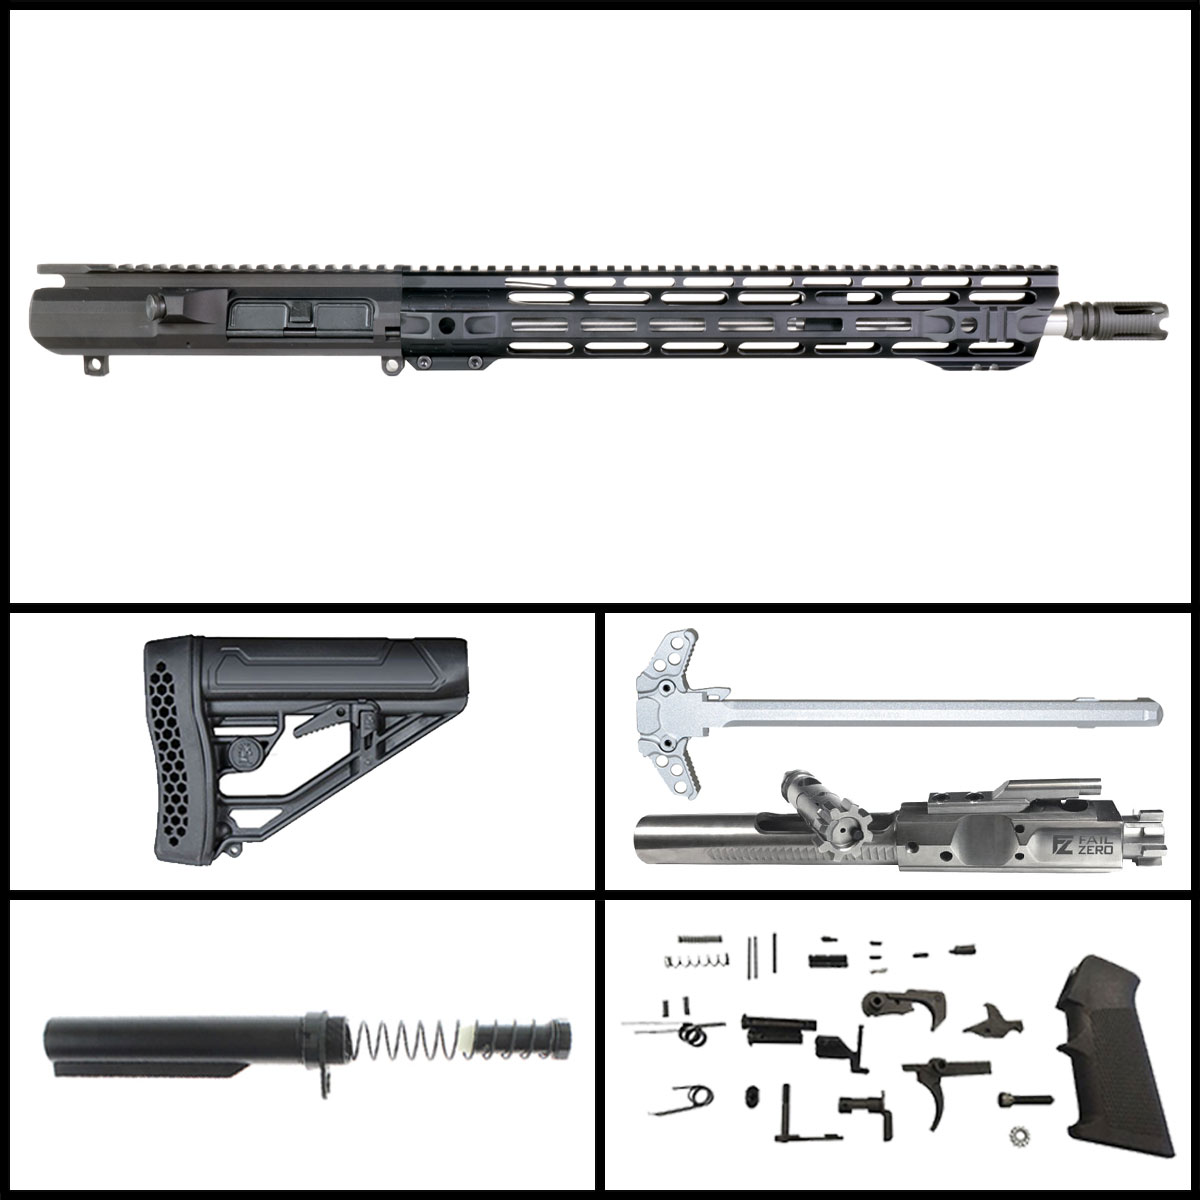 Davidson Defense 'Ironclad' 16-inch LR-308 .308 Win Stainless Rifle Full Build Kit